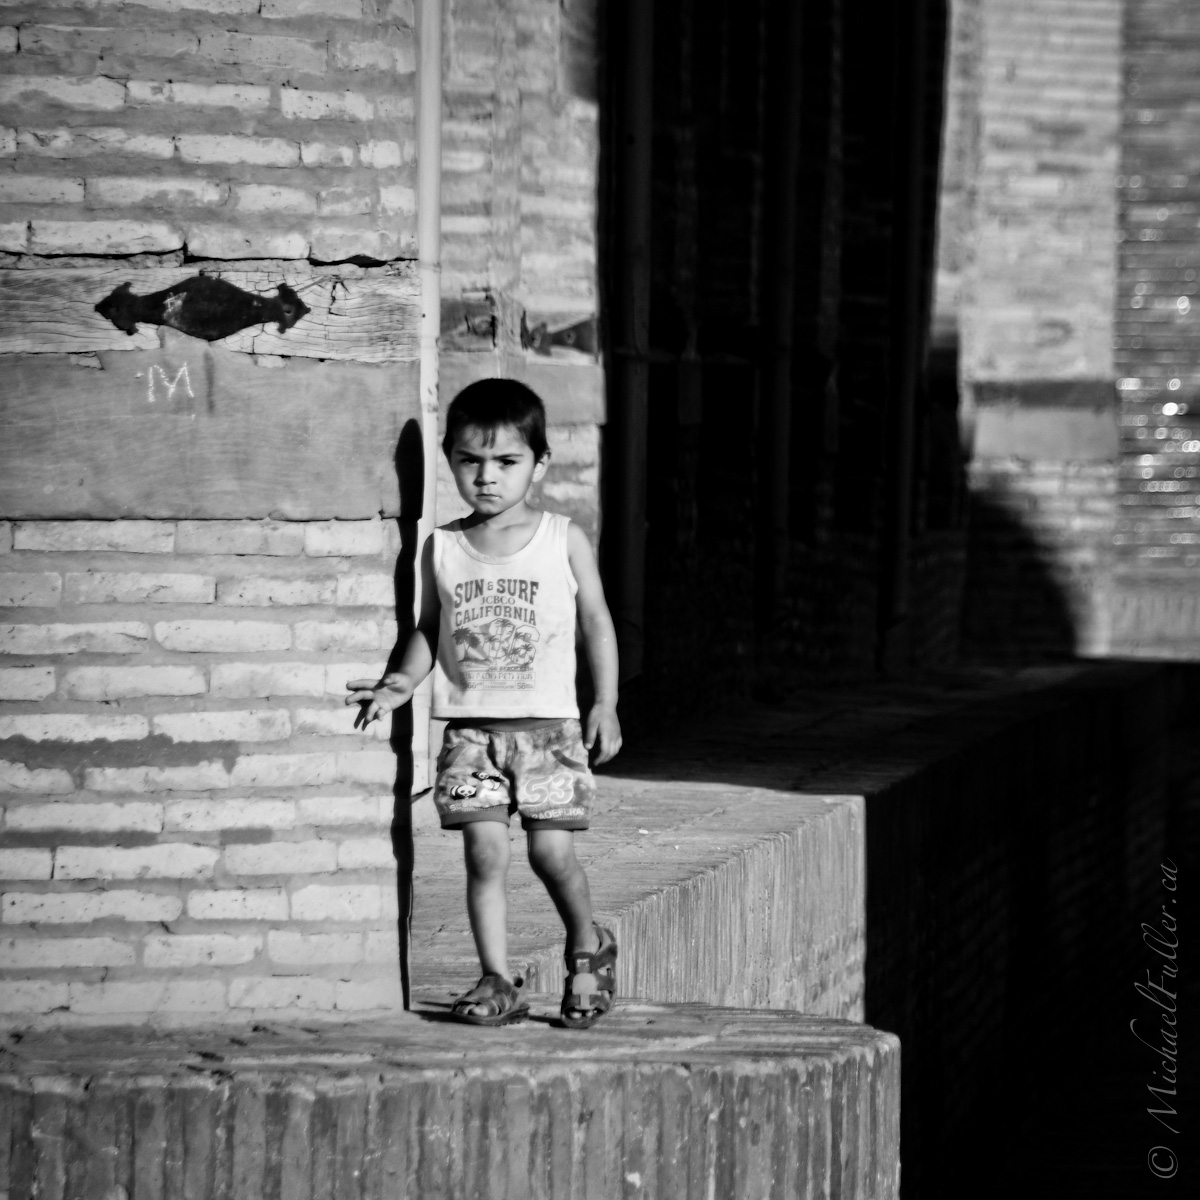 In the empty early morning streets, a child strolls aimlessly and unsupervised.